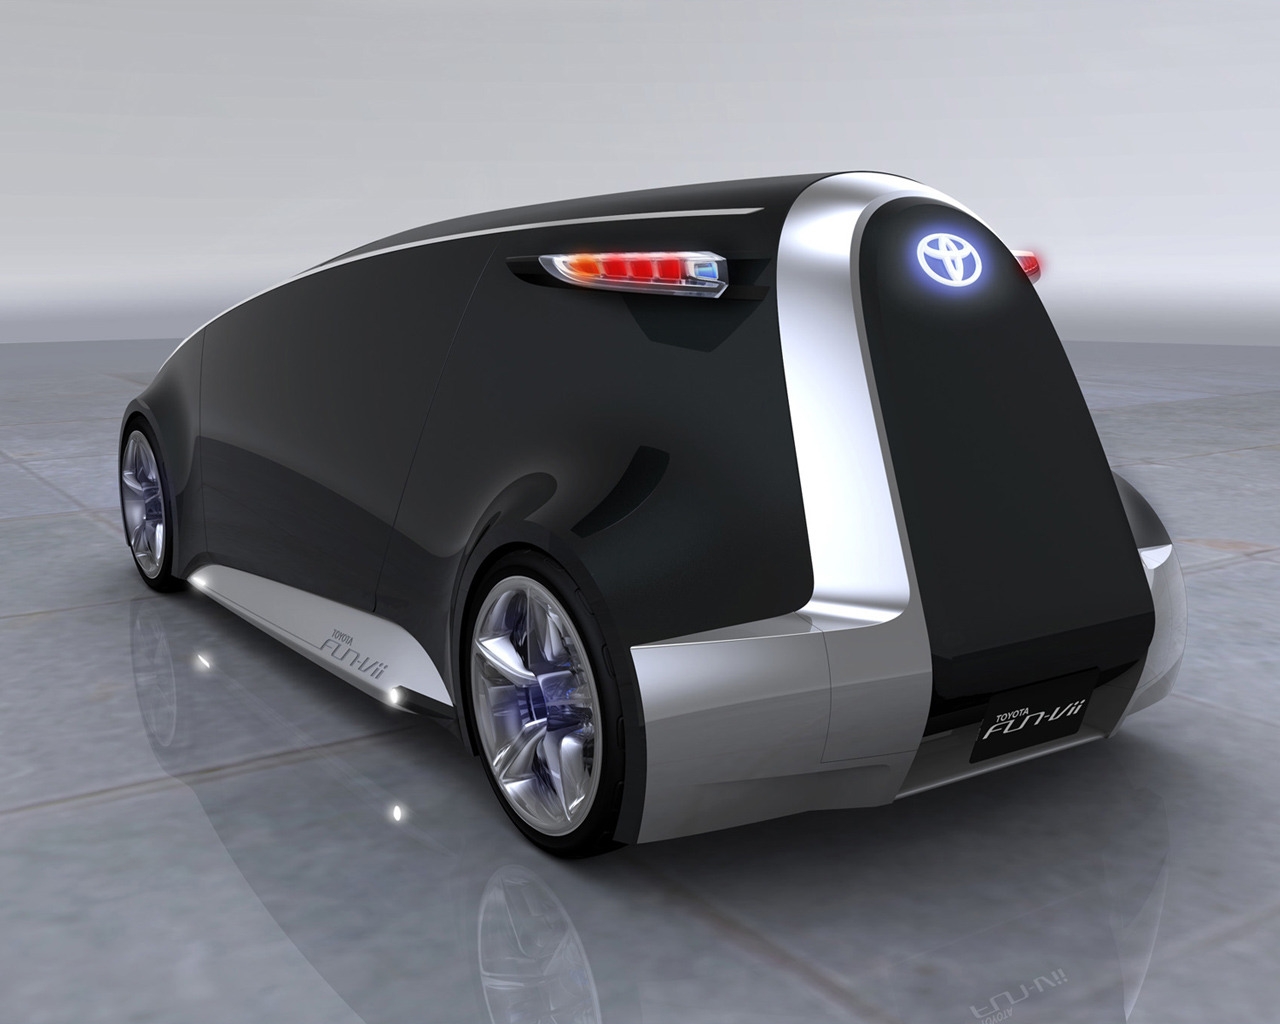 2011 Toyota Fun Vii Concept for 1280 x 1024 resolution